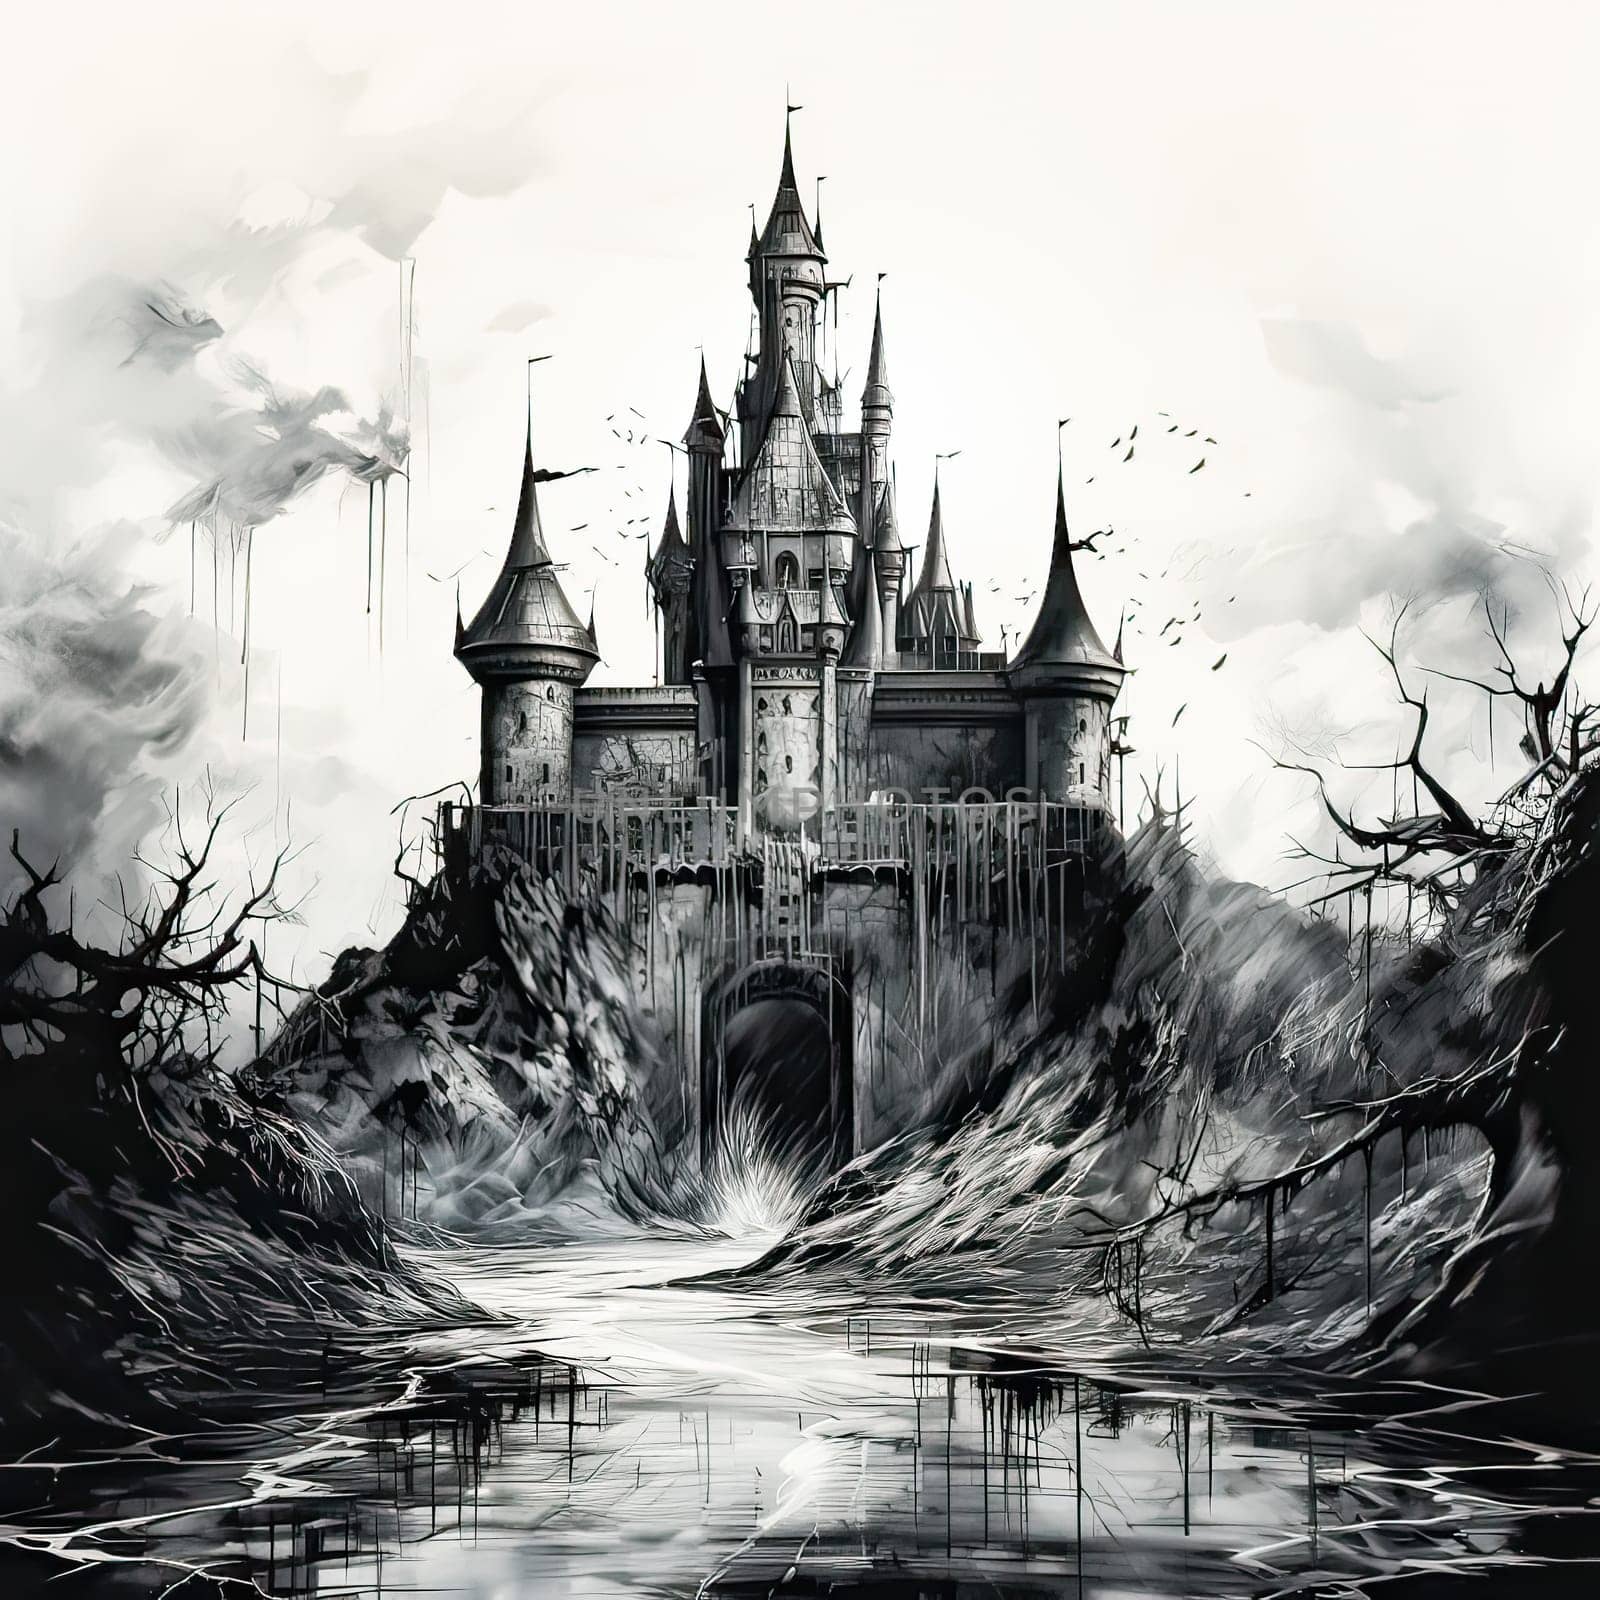 Gloomy castle in watercolor A haunting masterpiece, capturing the mystique and melancholy of an ancient fortress in the atmospheric hues